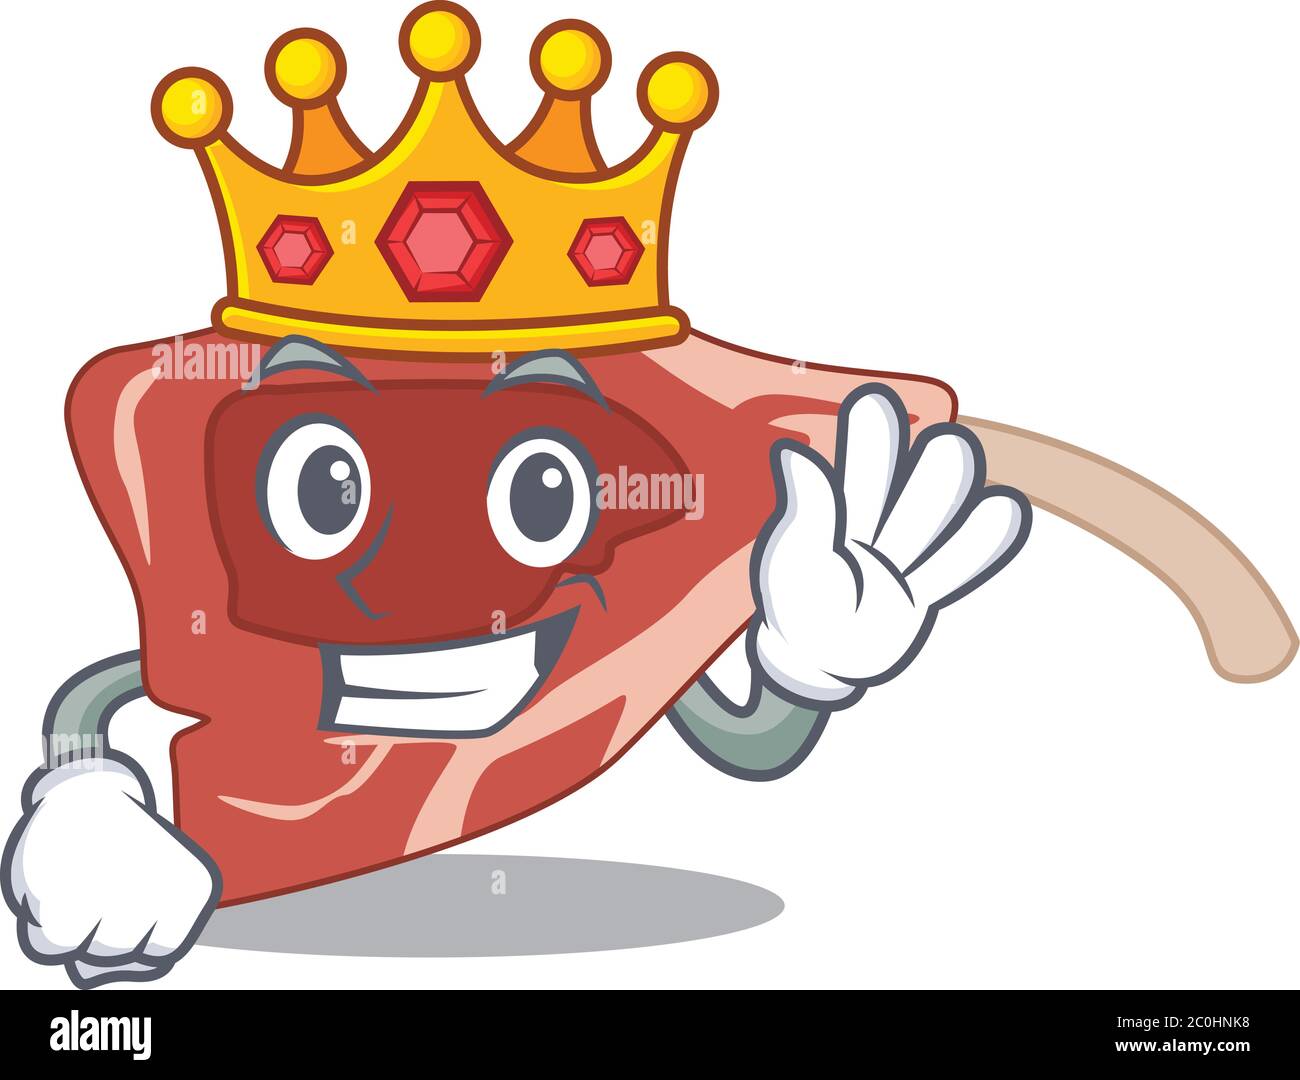 A Wise King of lamb chop mascot design style with gold crown Stock Vector